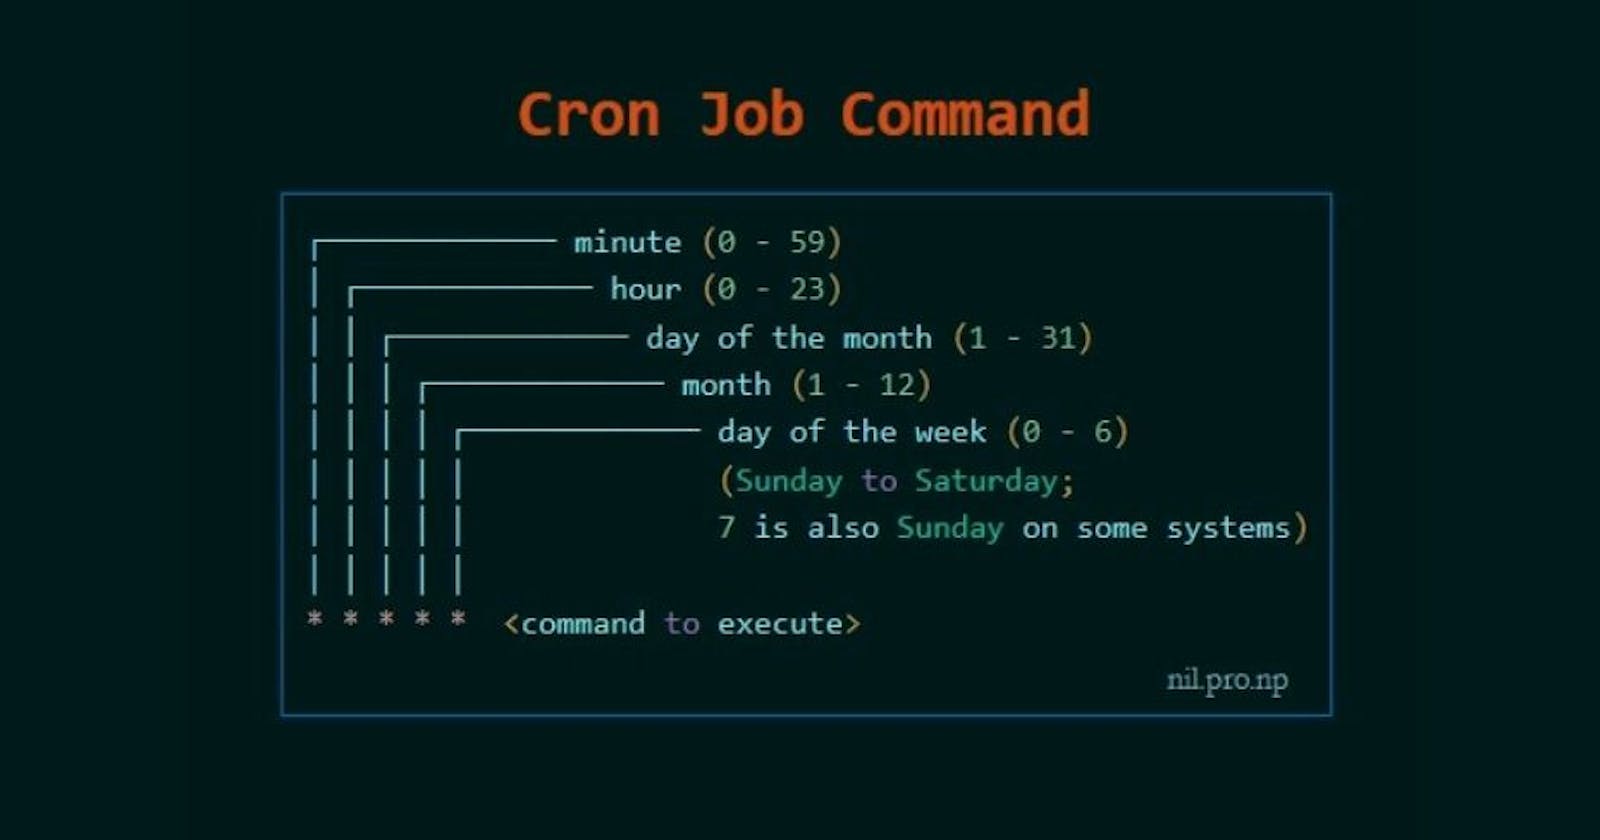 Step by Step guide for Cron Jobs